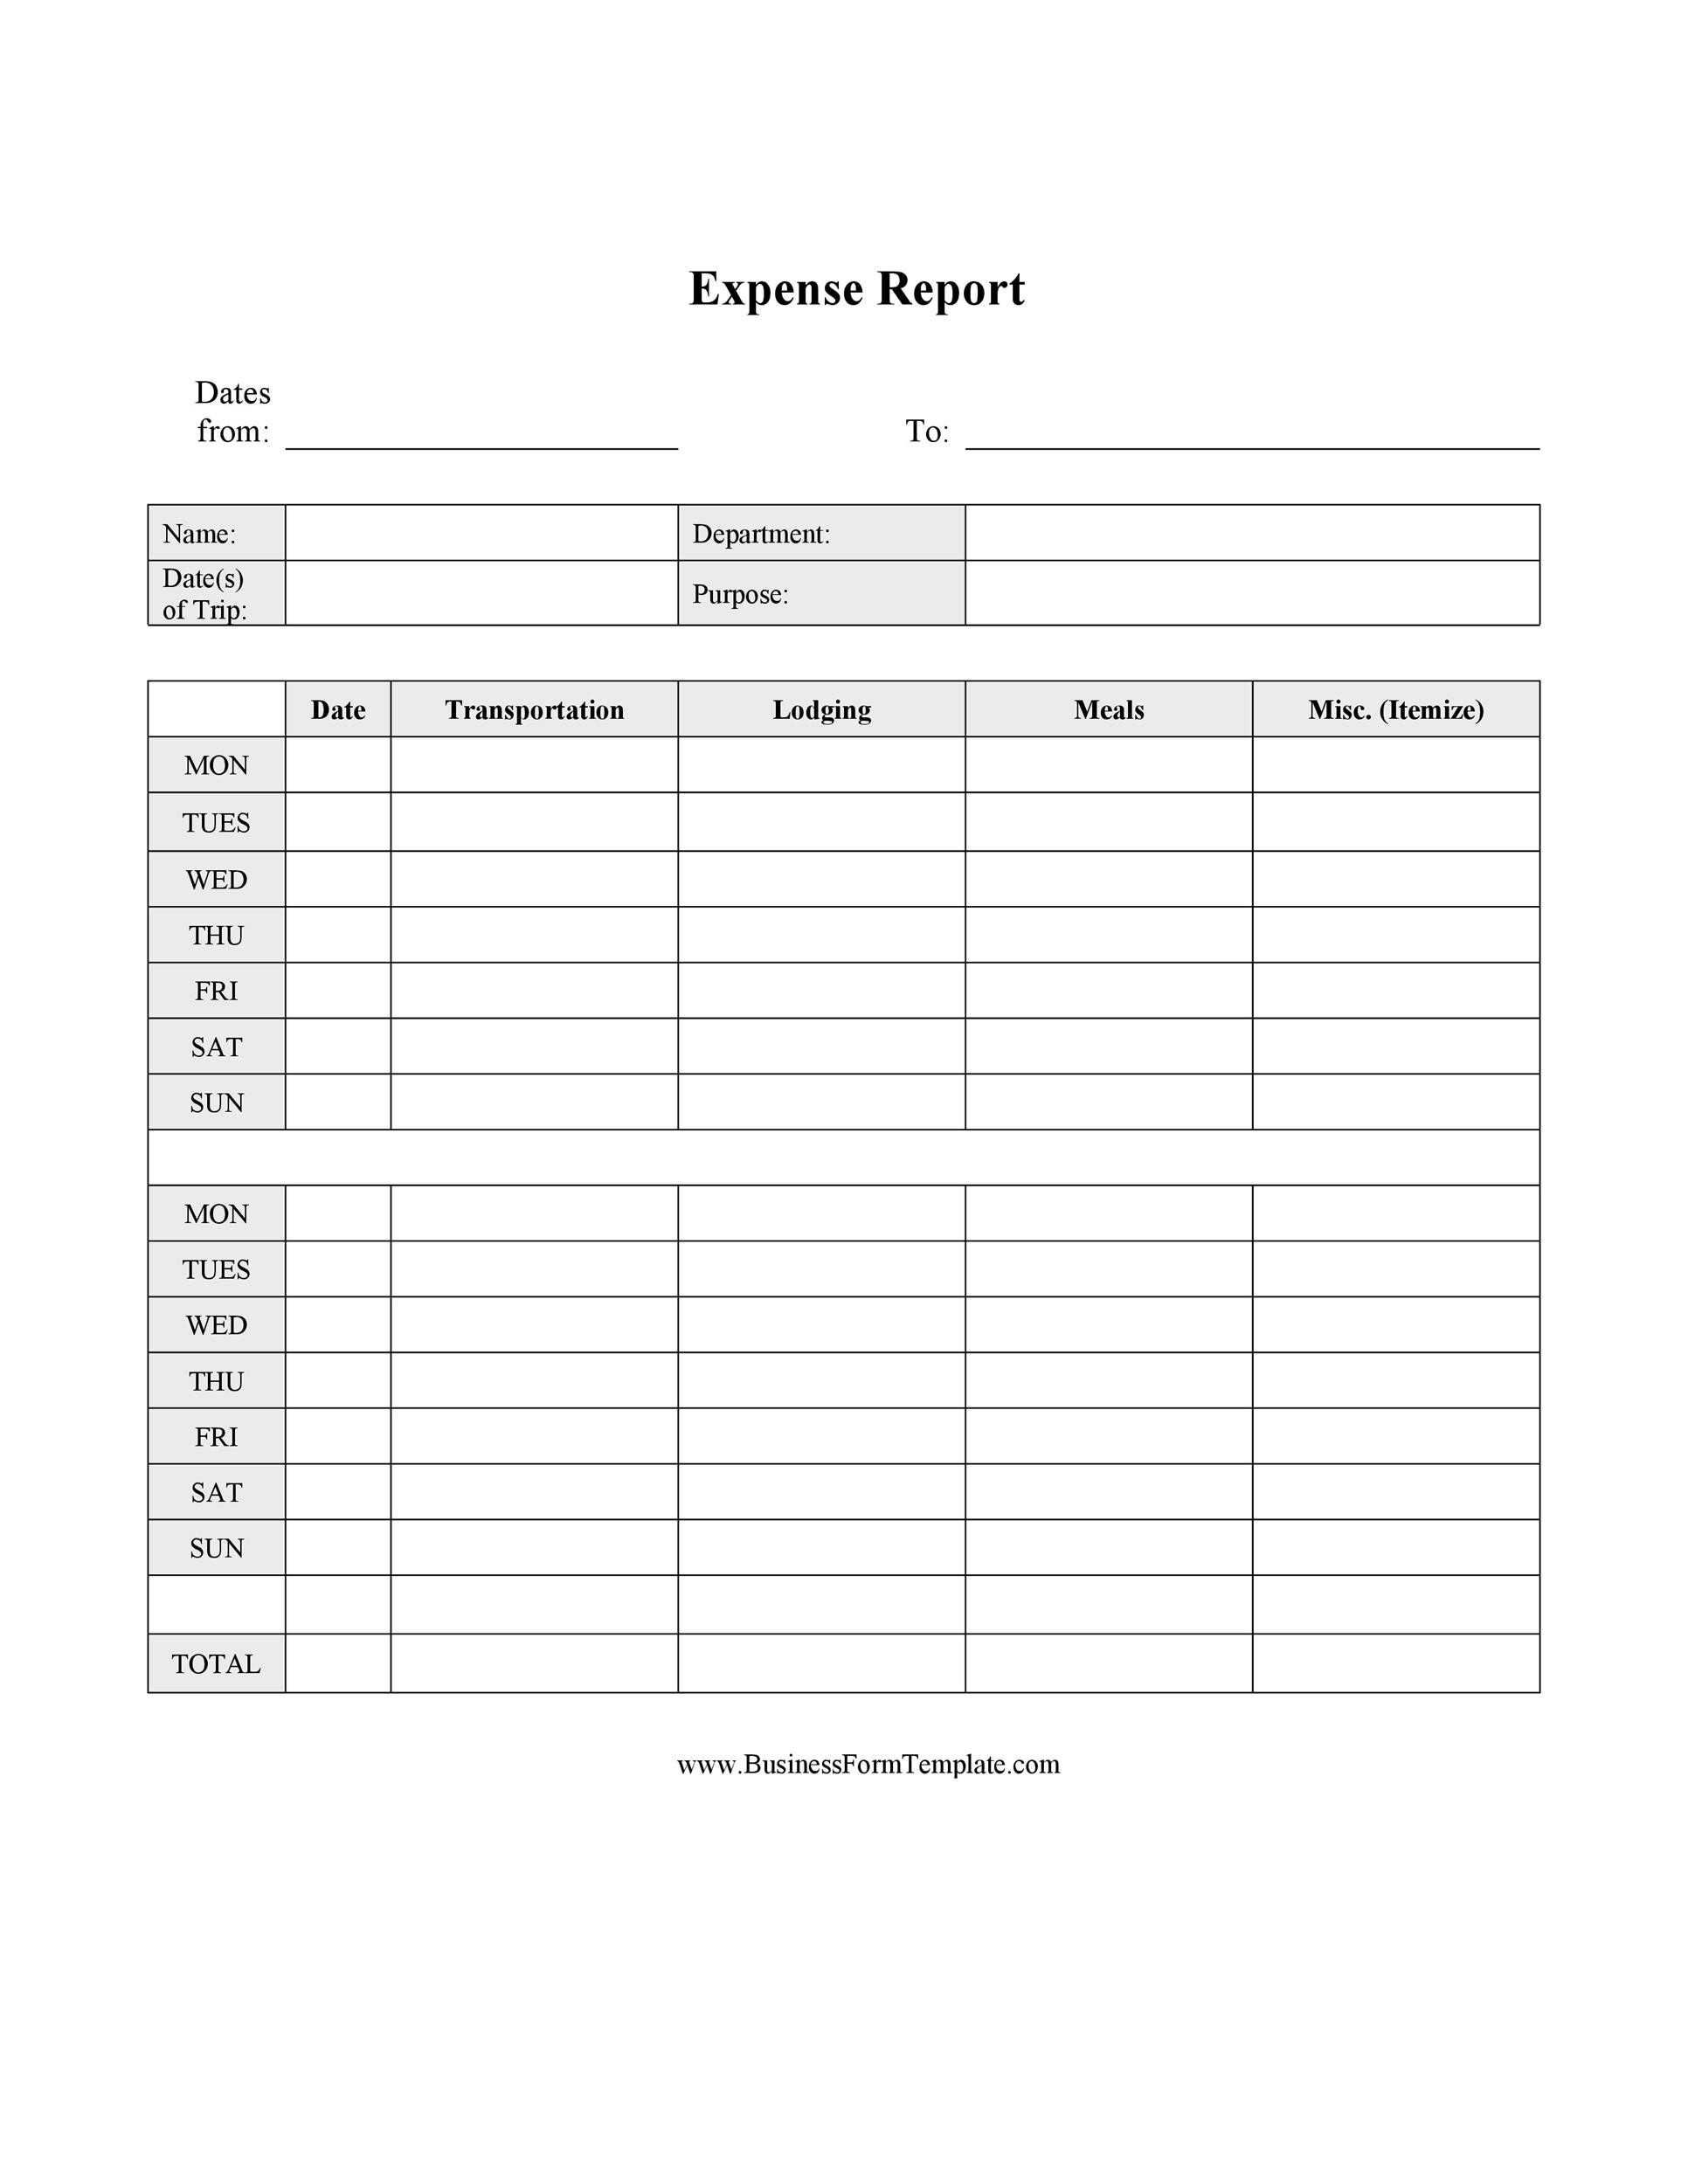 40+ Expense Report Templates To Help You Save Money ᐅ Templatelab For Expense Report Template Xls